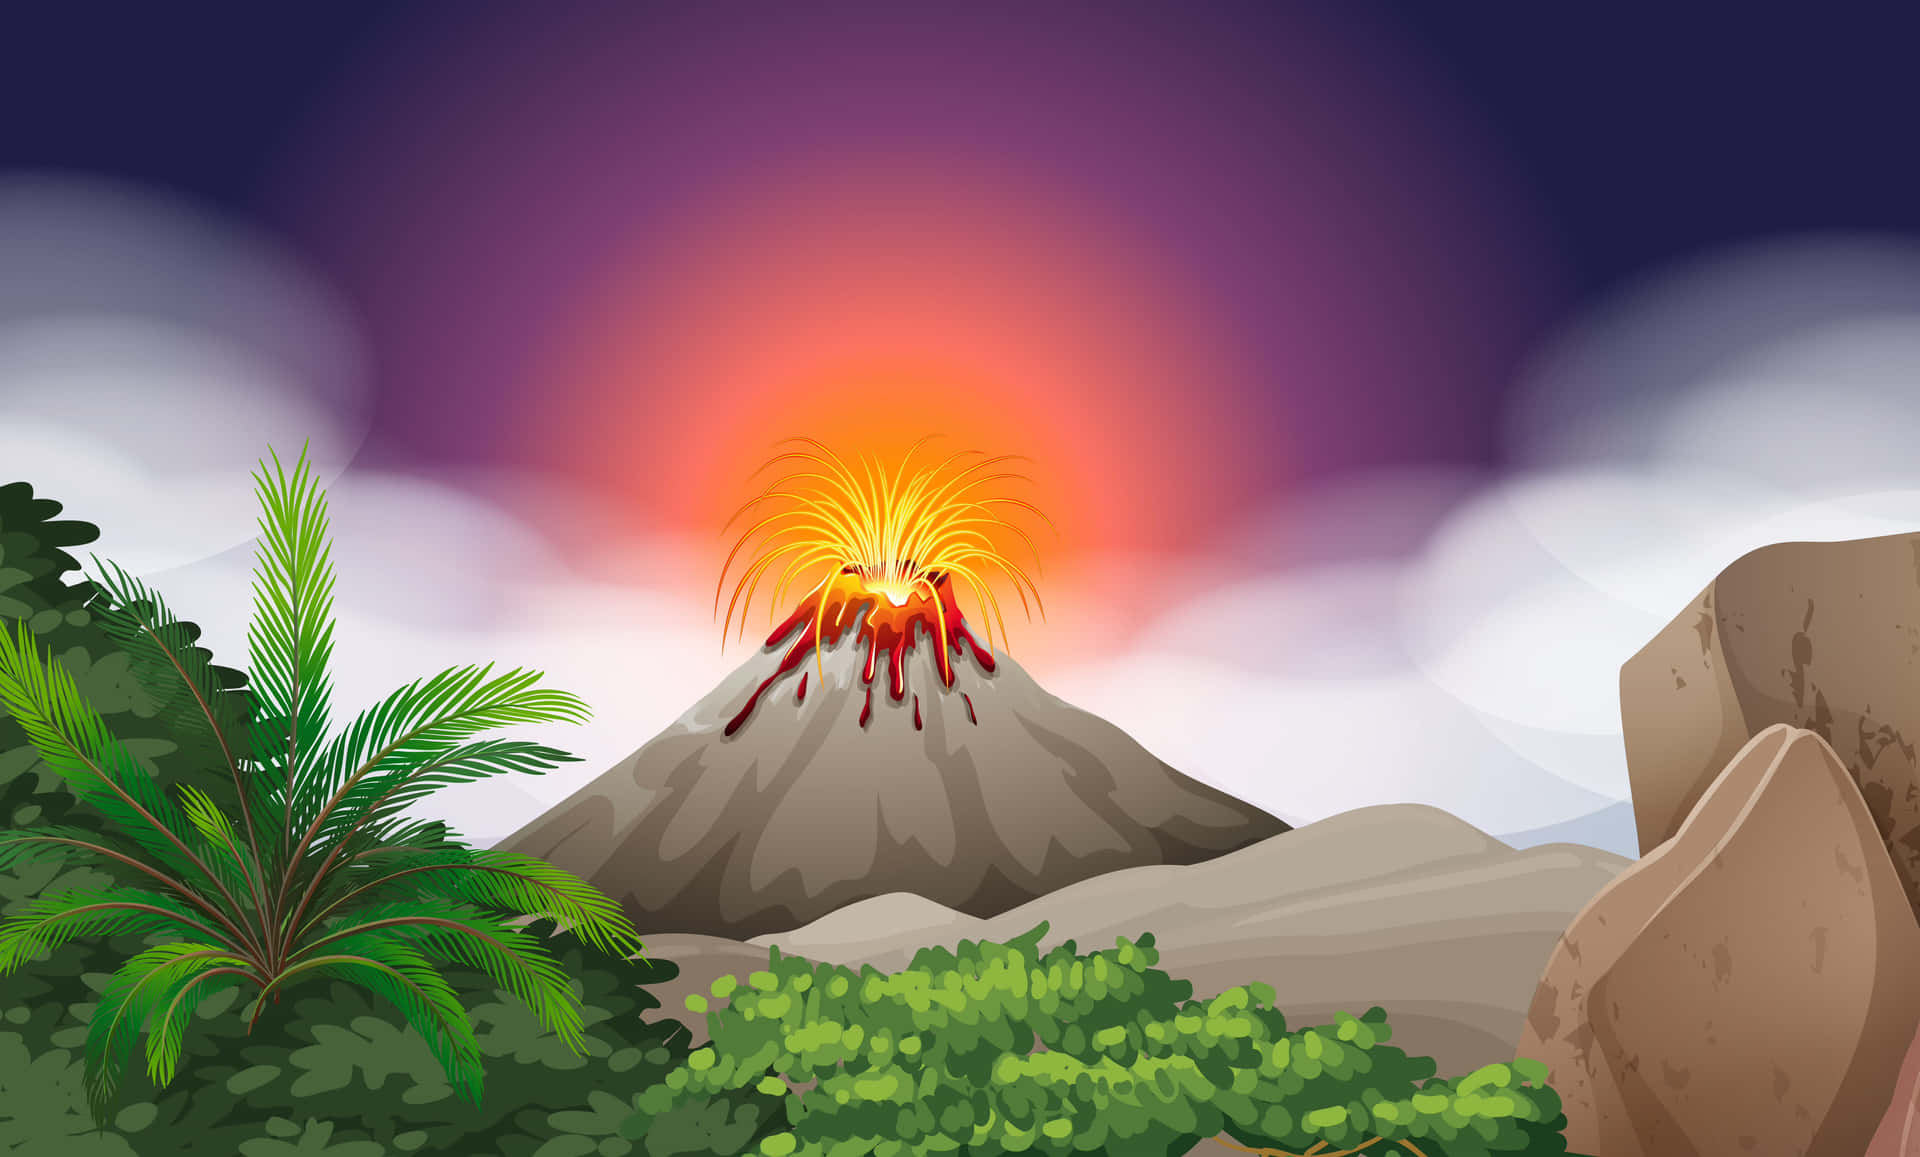 “An Erupting Volcano Offers a Blazing Spectacle at Nightfall.”